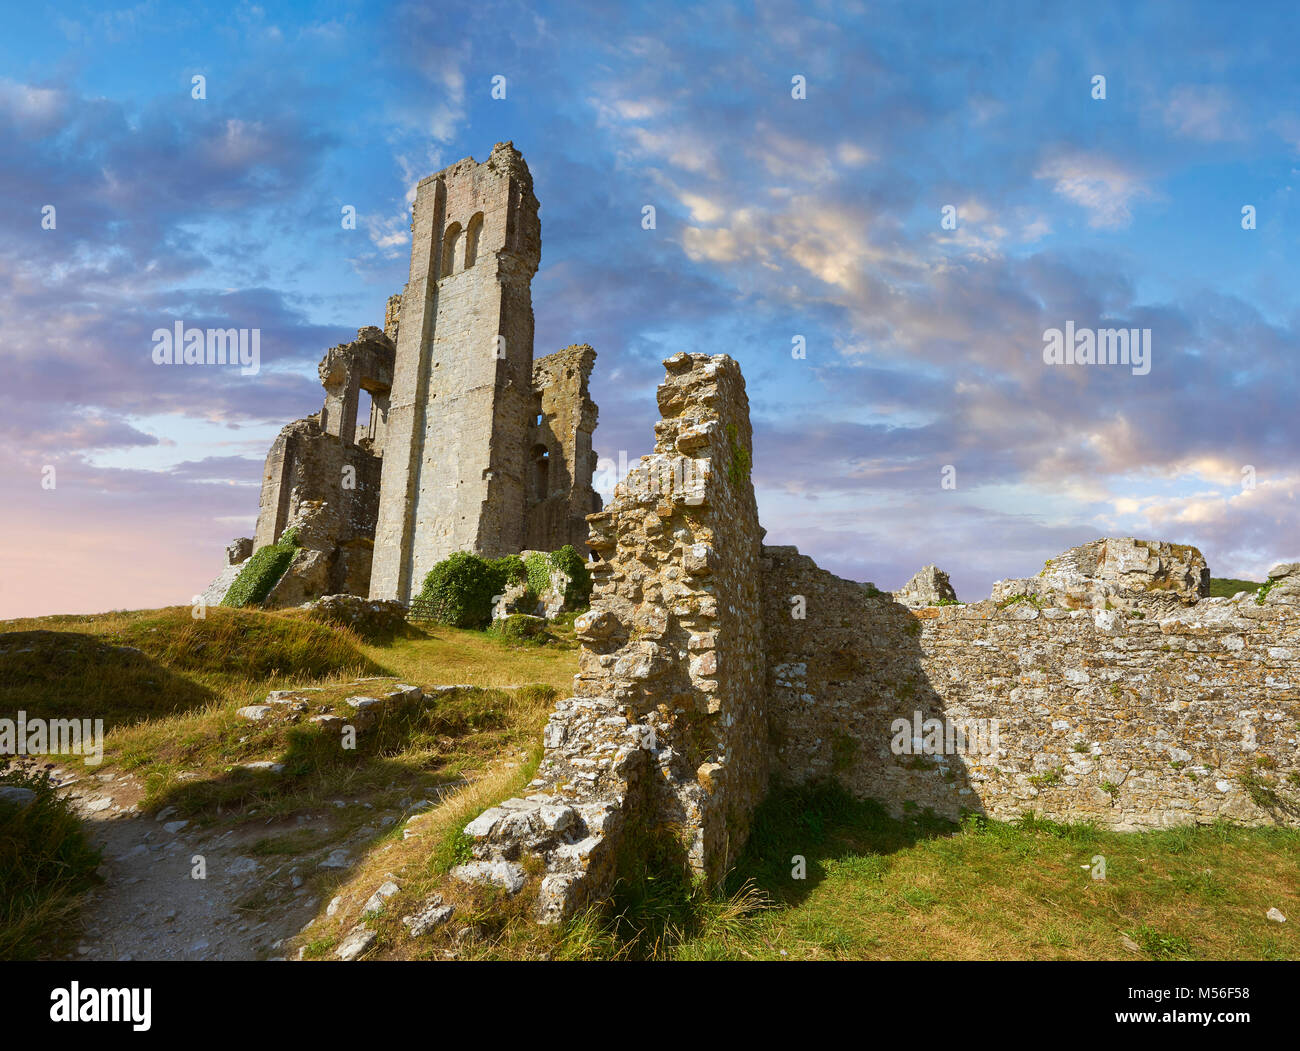 Medieval Corfe castle keep  close up  sunrise, built in 1086 by William the Conqueror, Dorset England Stock Photo